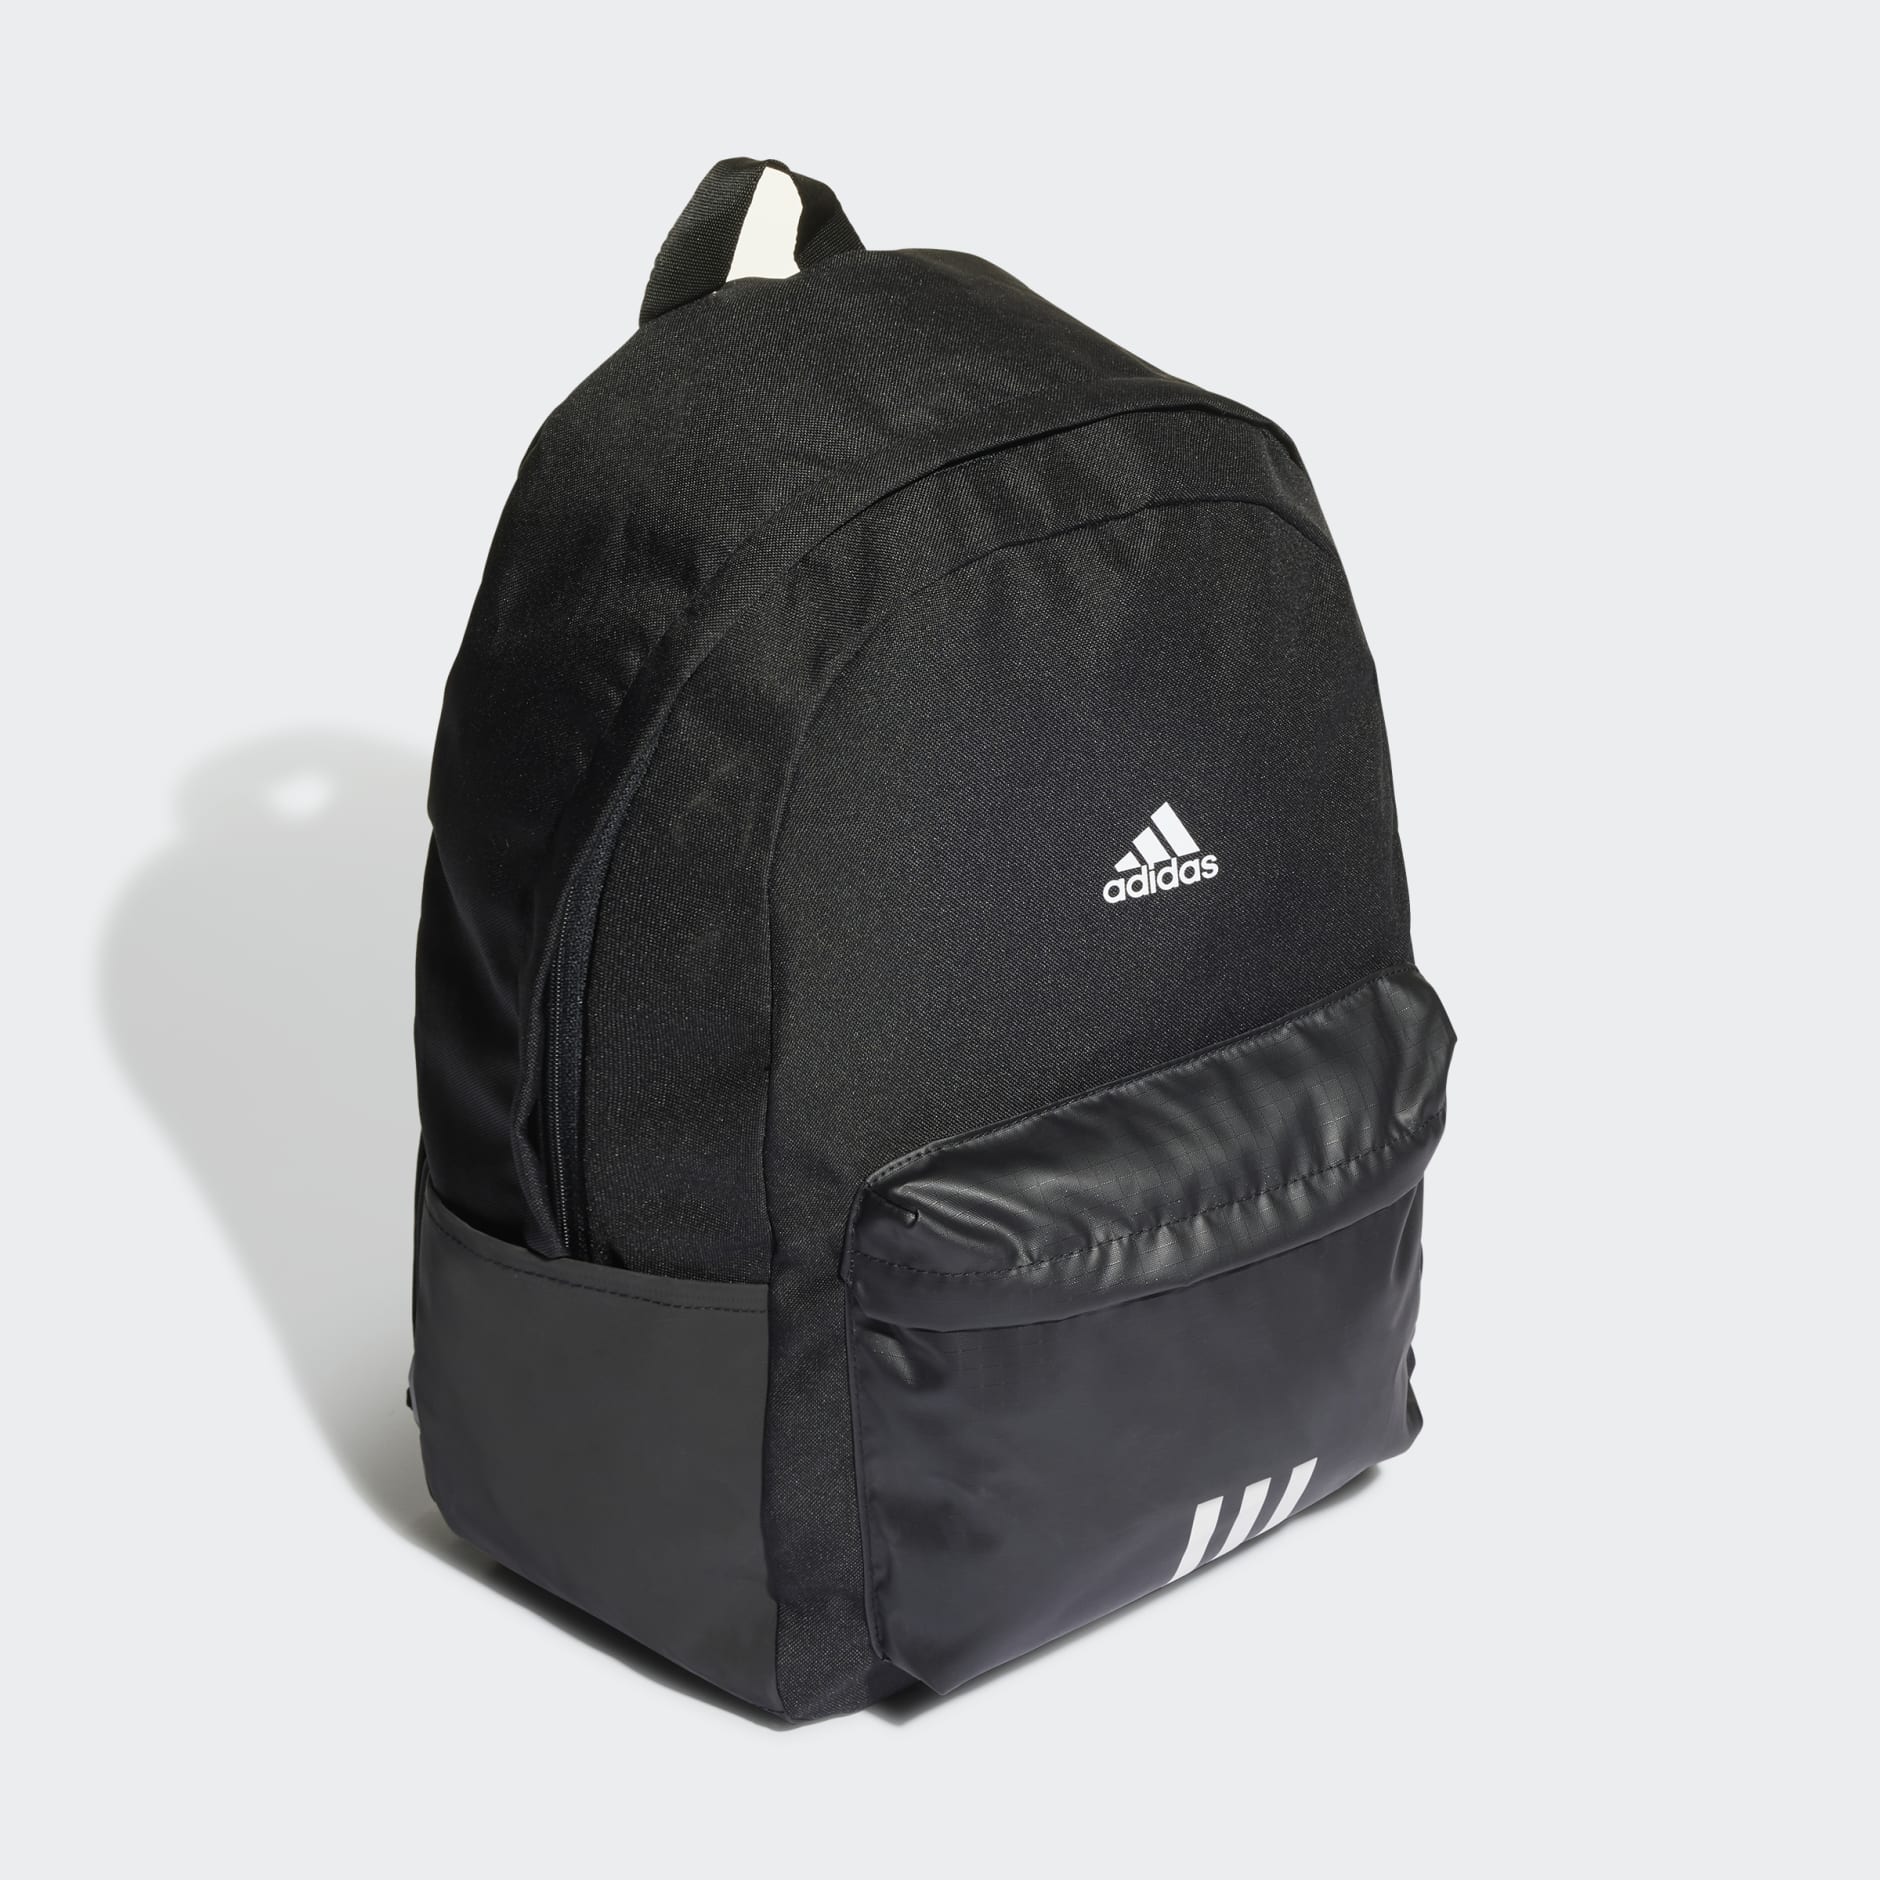 Accessories - Classic Badge of Sport 3-Stripes Backpack - Black ...